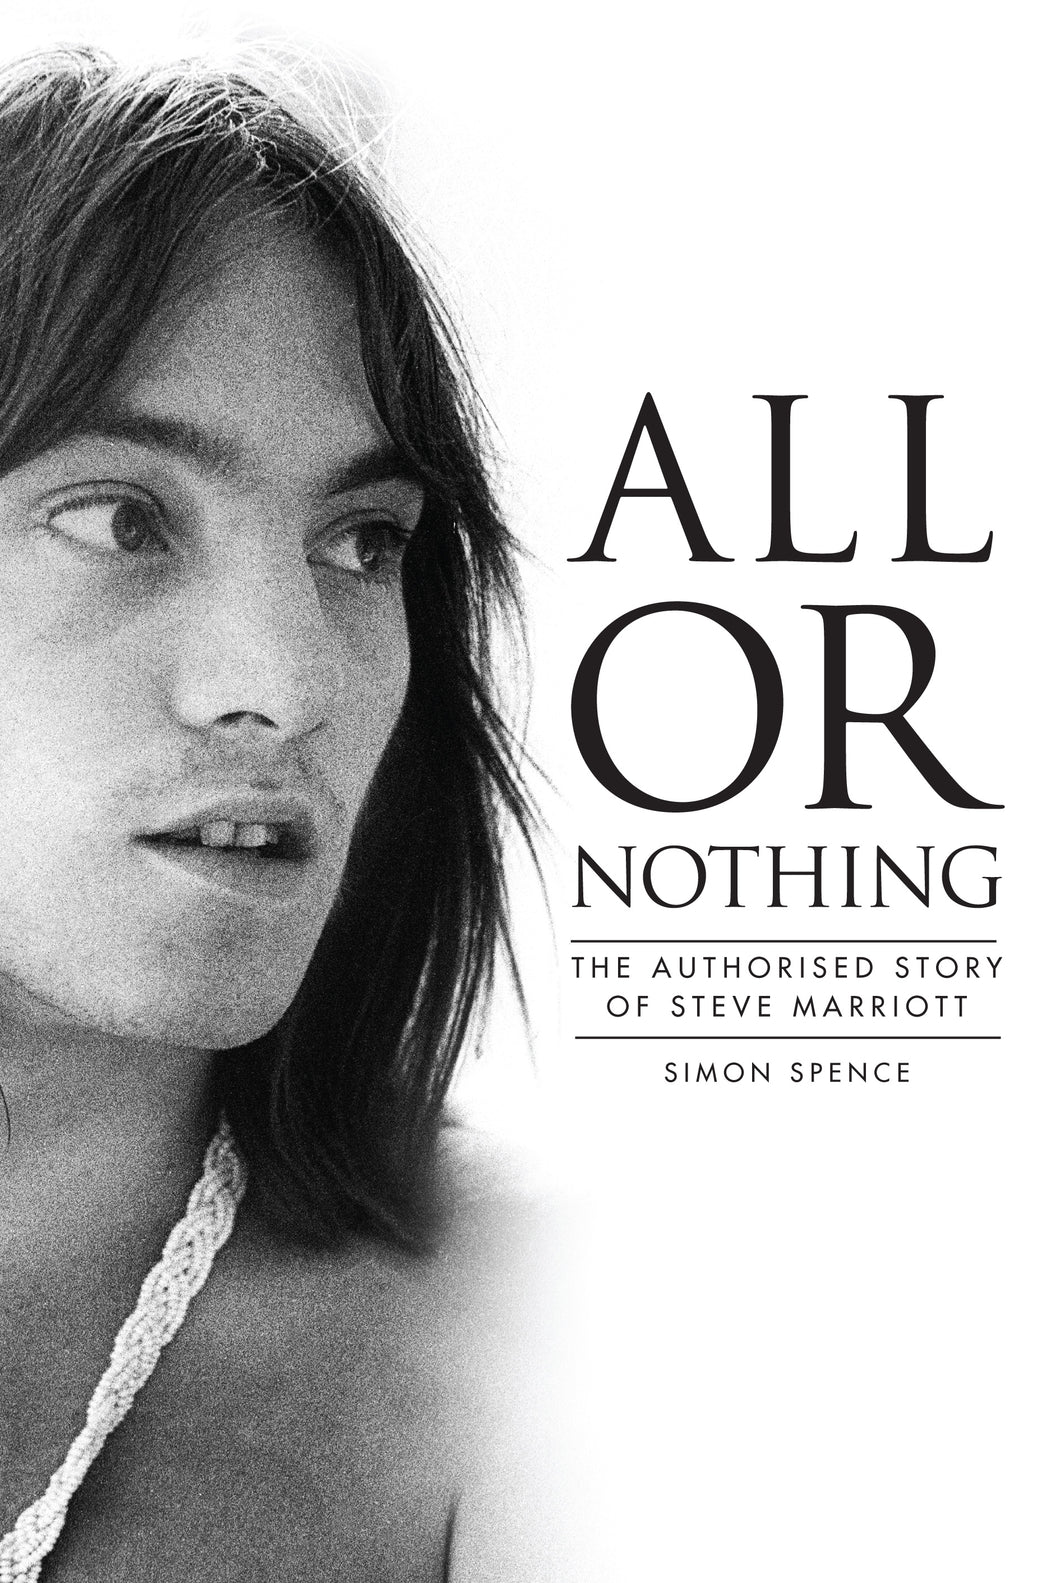 All Or Nothing: The Authorised Story of Steve Marriott - Paperback Edition